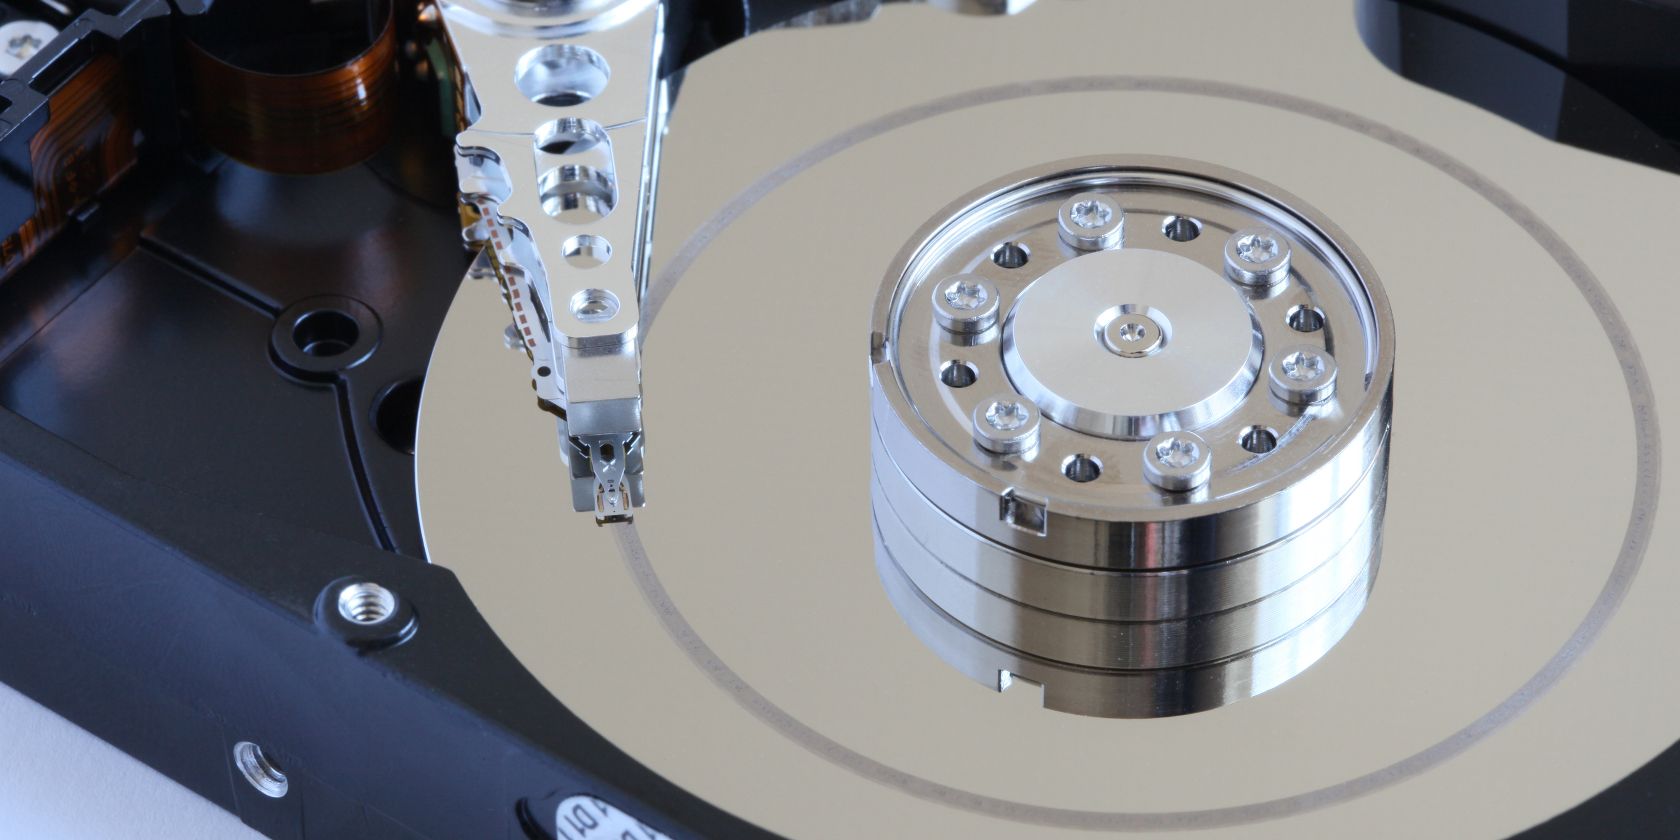 How to Determine If the Computer Is Slowing Down Because Of Data on the Hard Drive